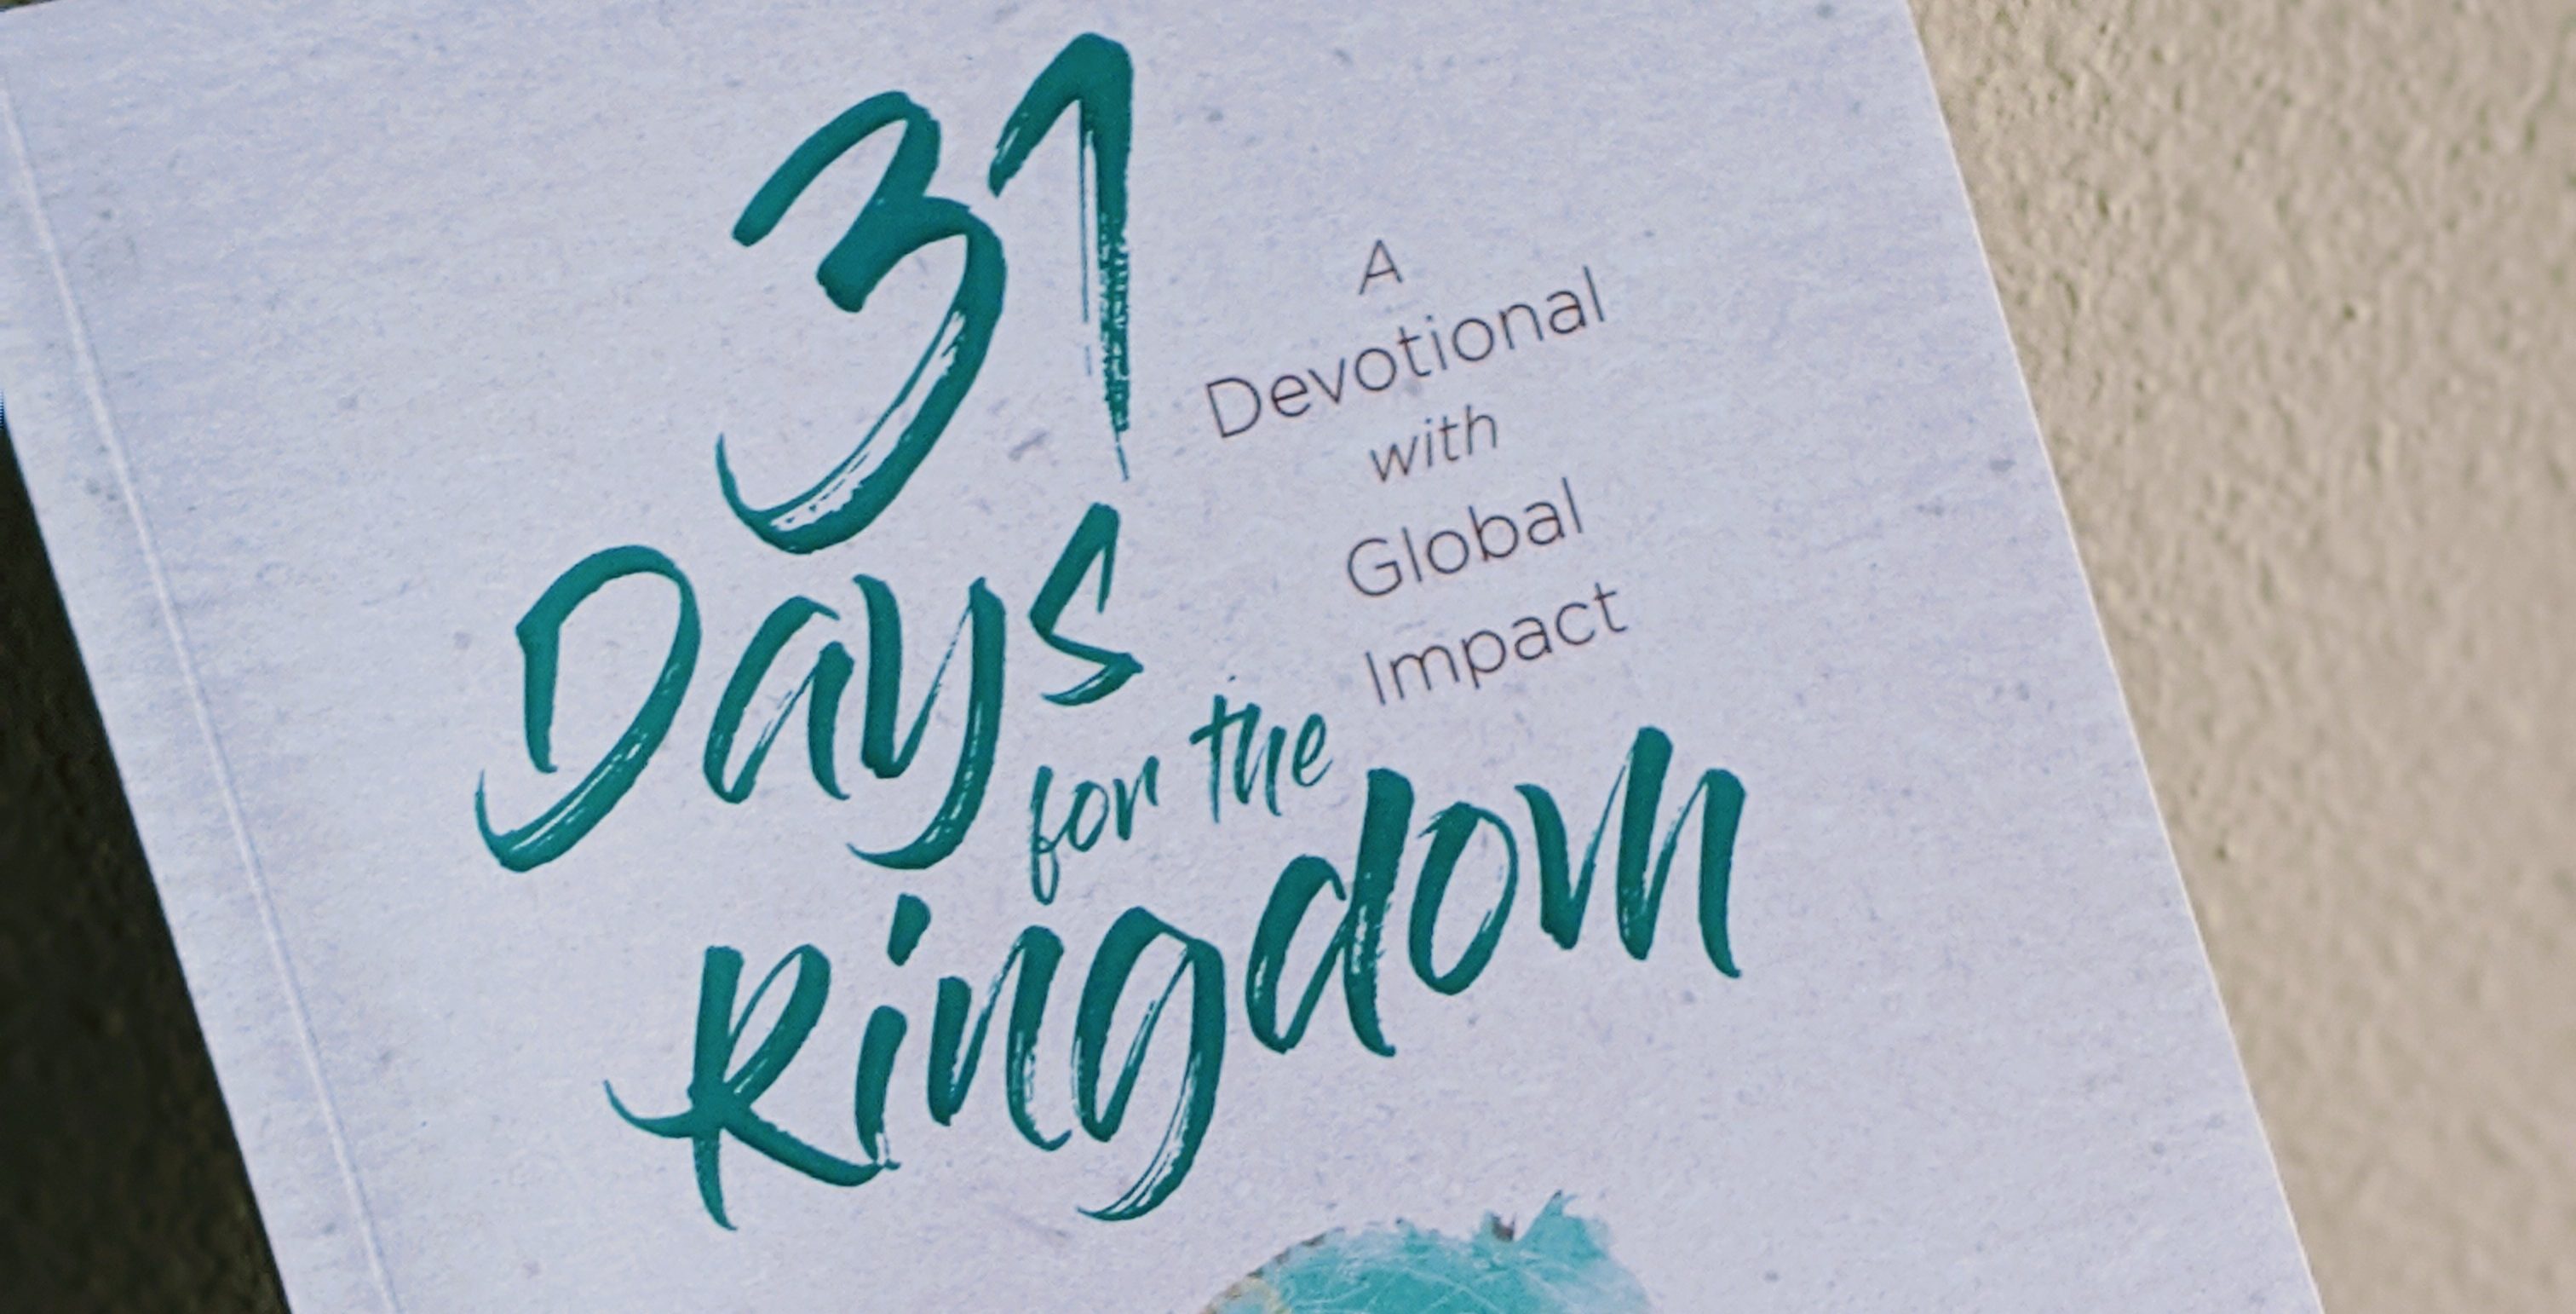 31 Days for the Kingdom 2020